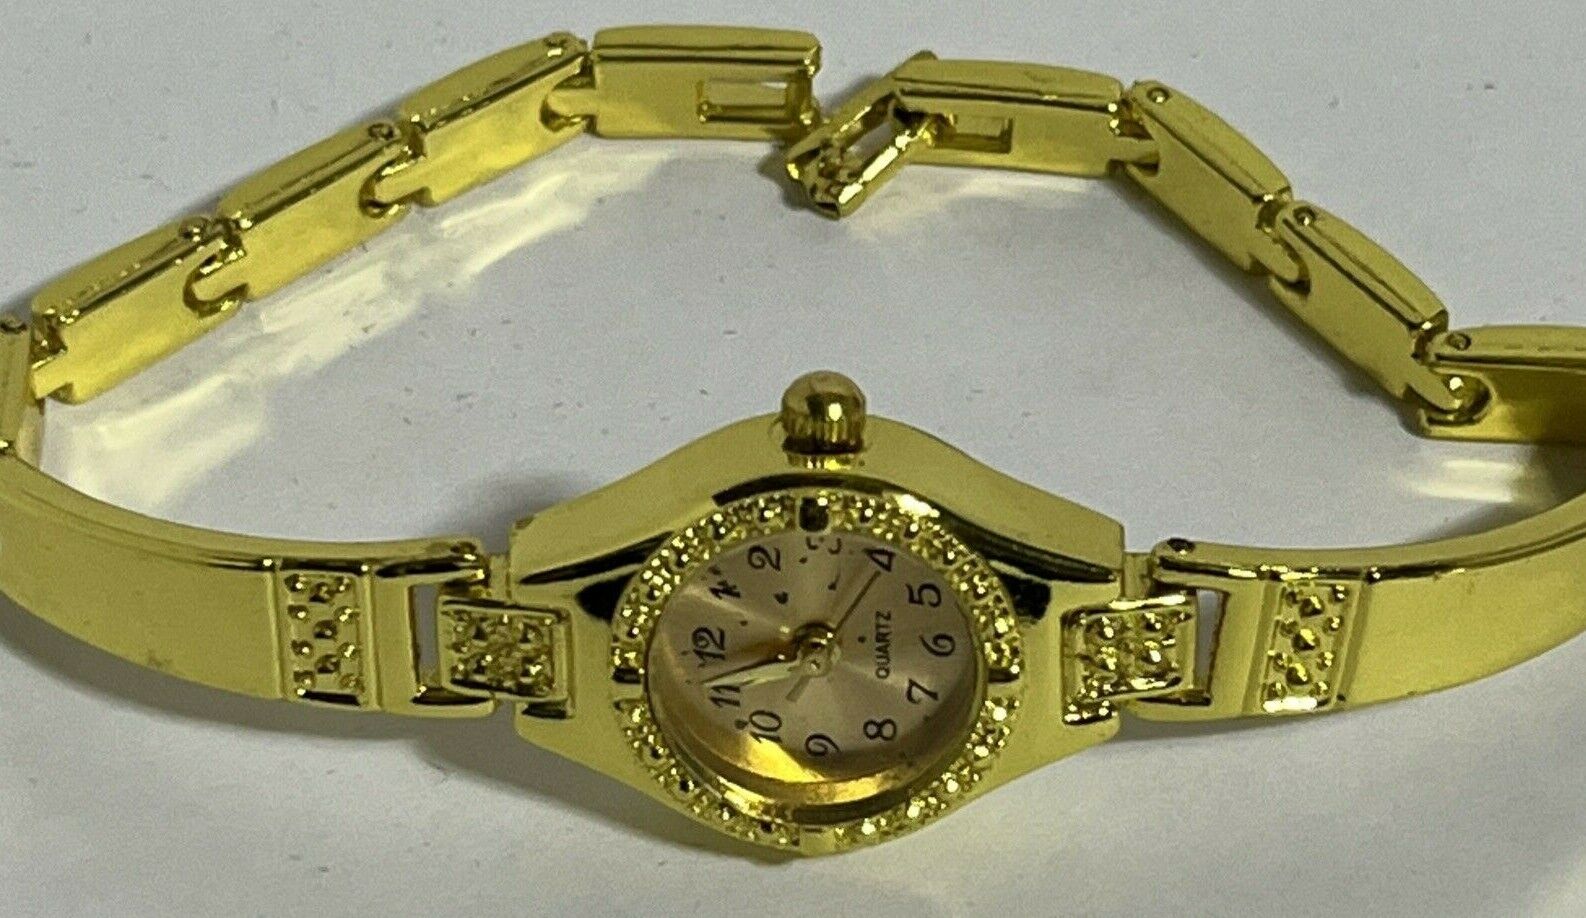 Vintage The Bradford Exchange Watch Gold Toned Quartz Analog Battery Operated